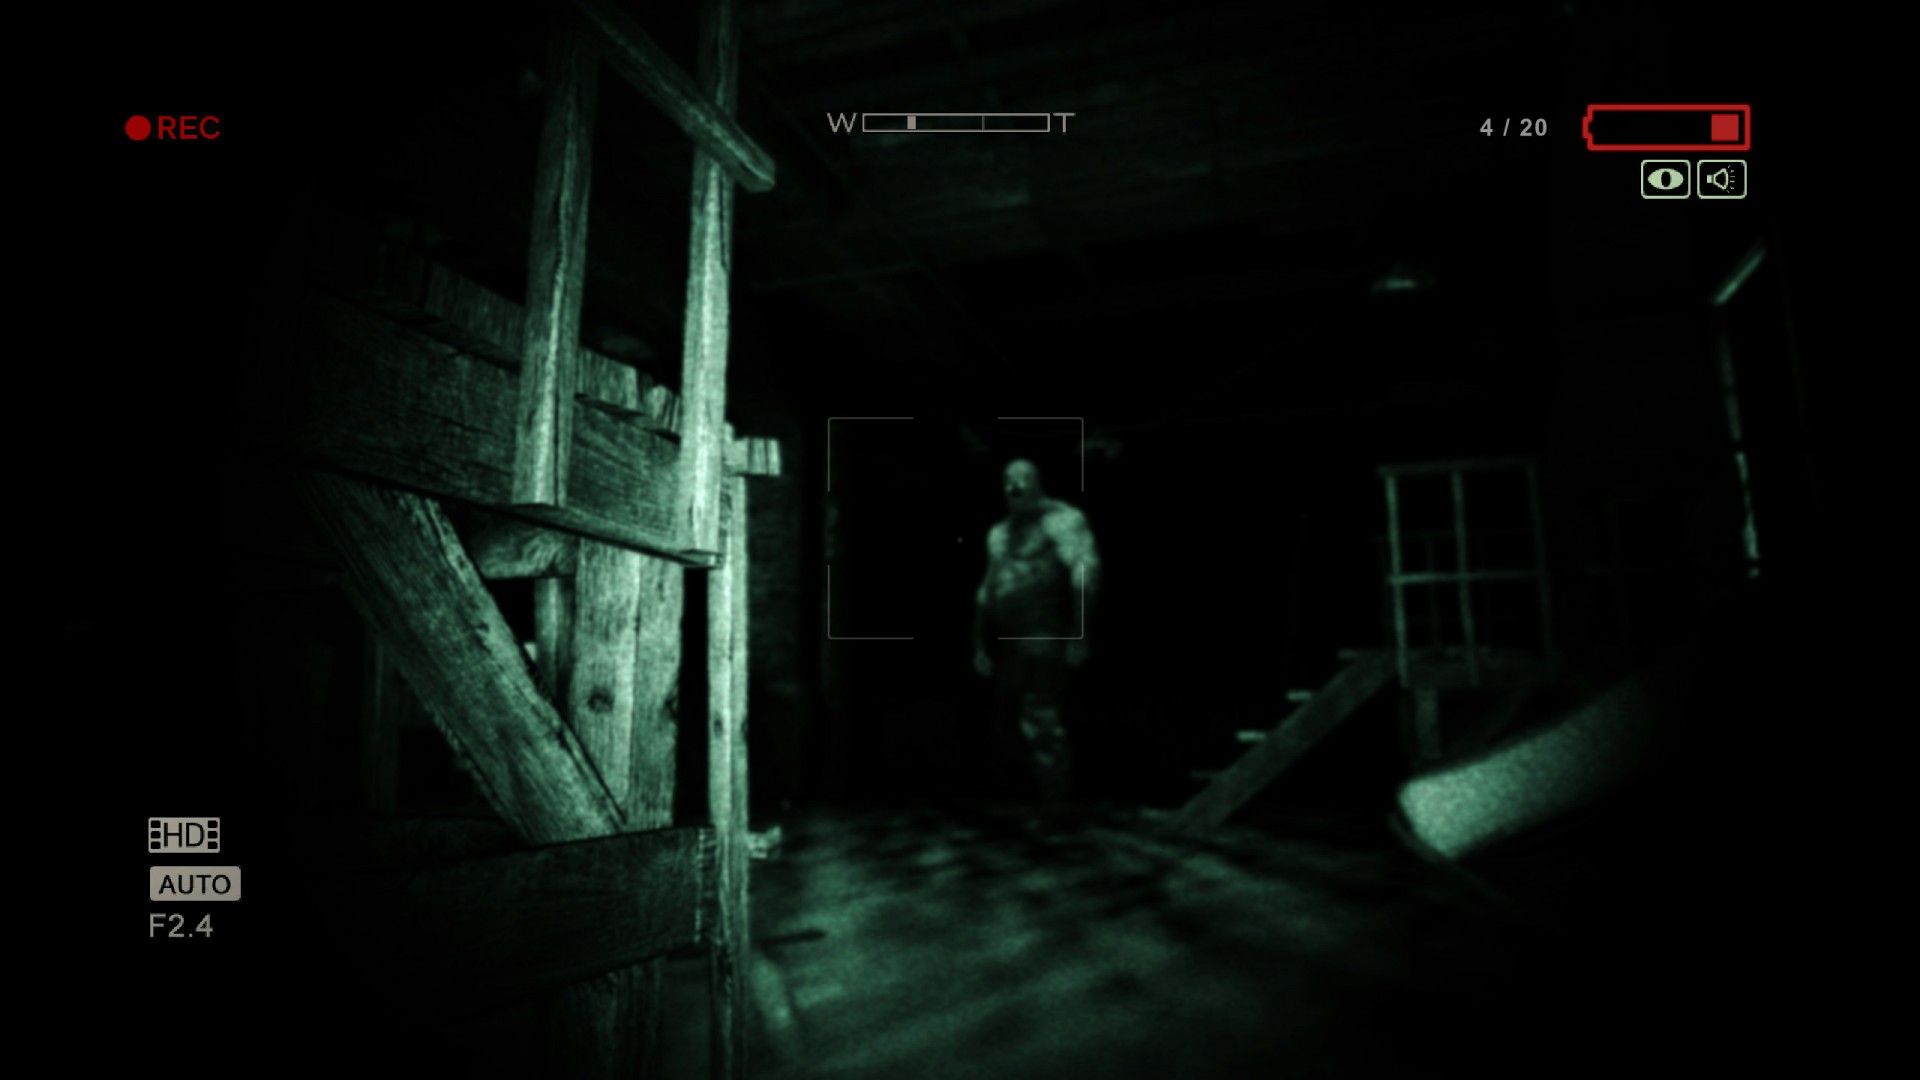 Outlast Night-vision camera revealing a hulking abomination lurking in the dark.